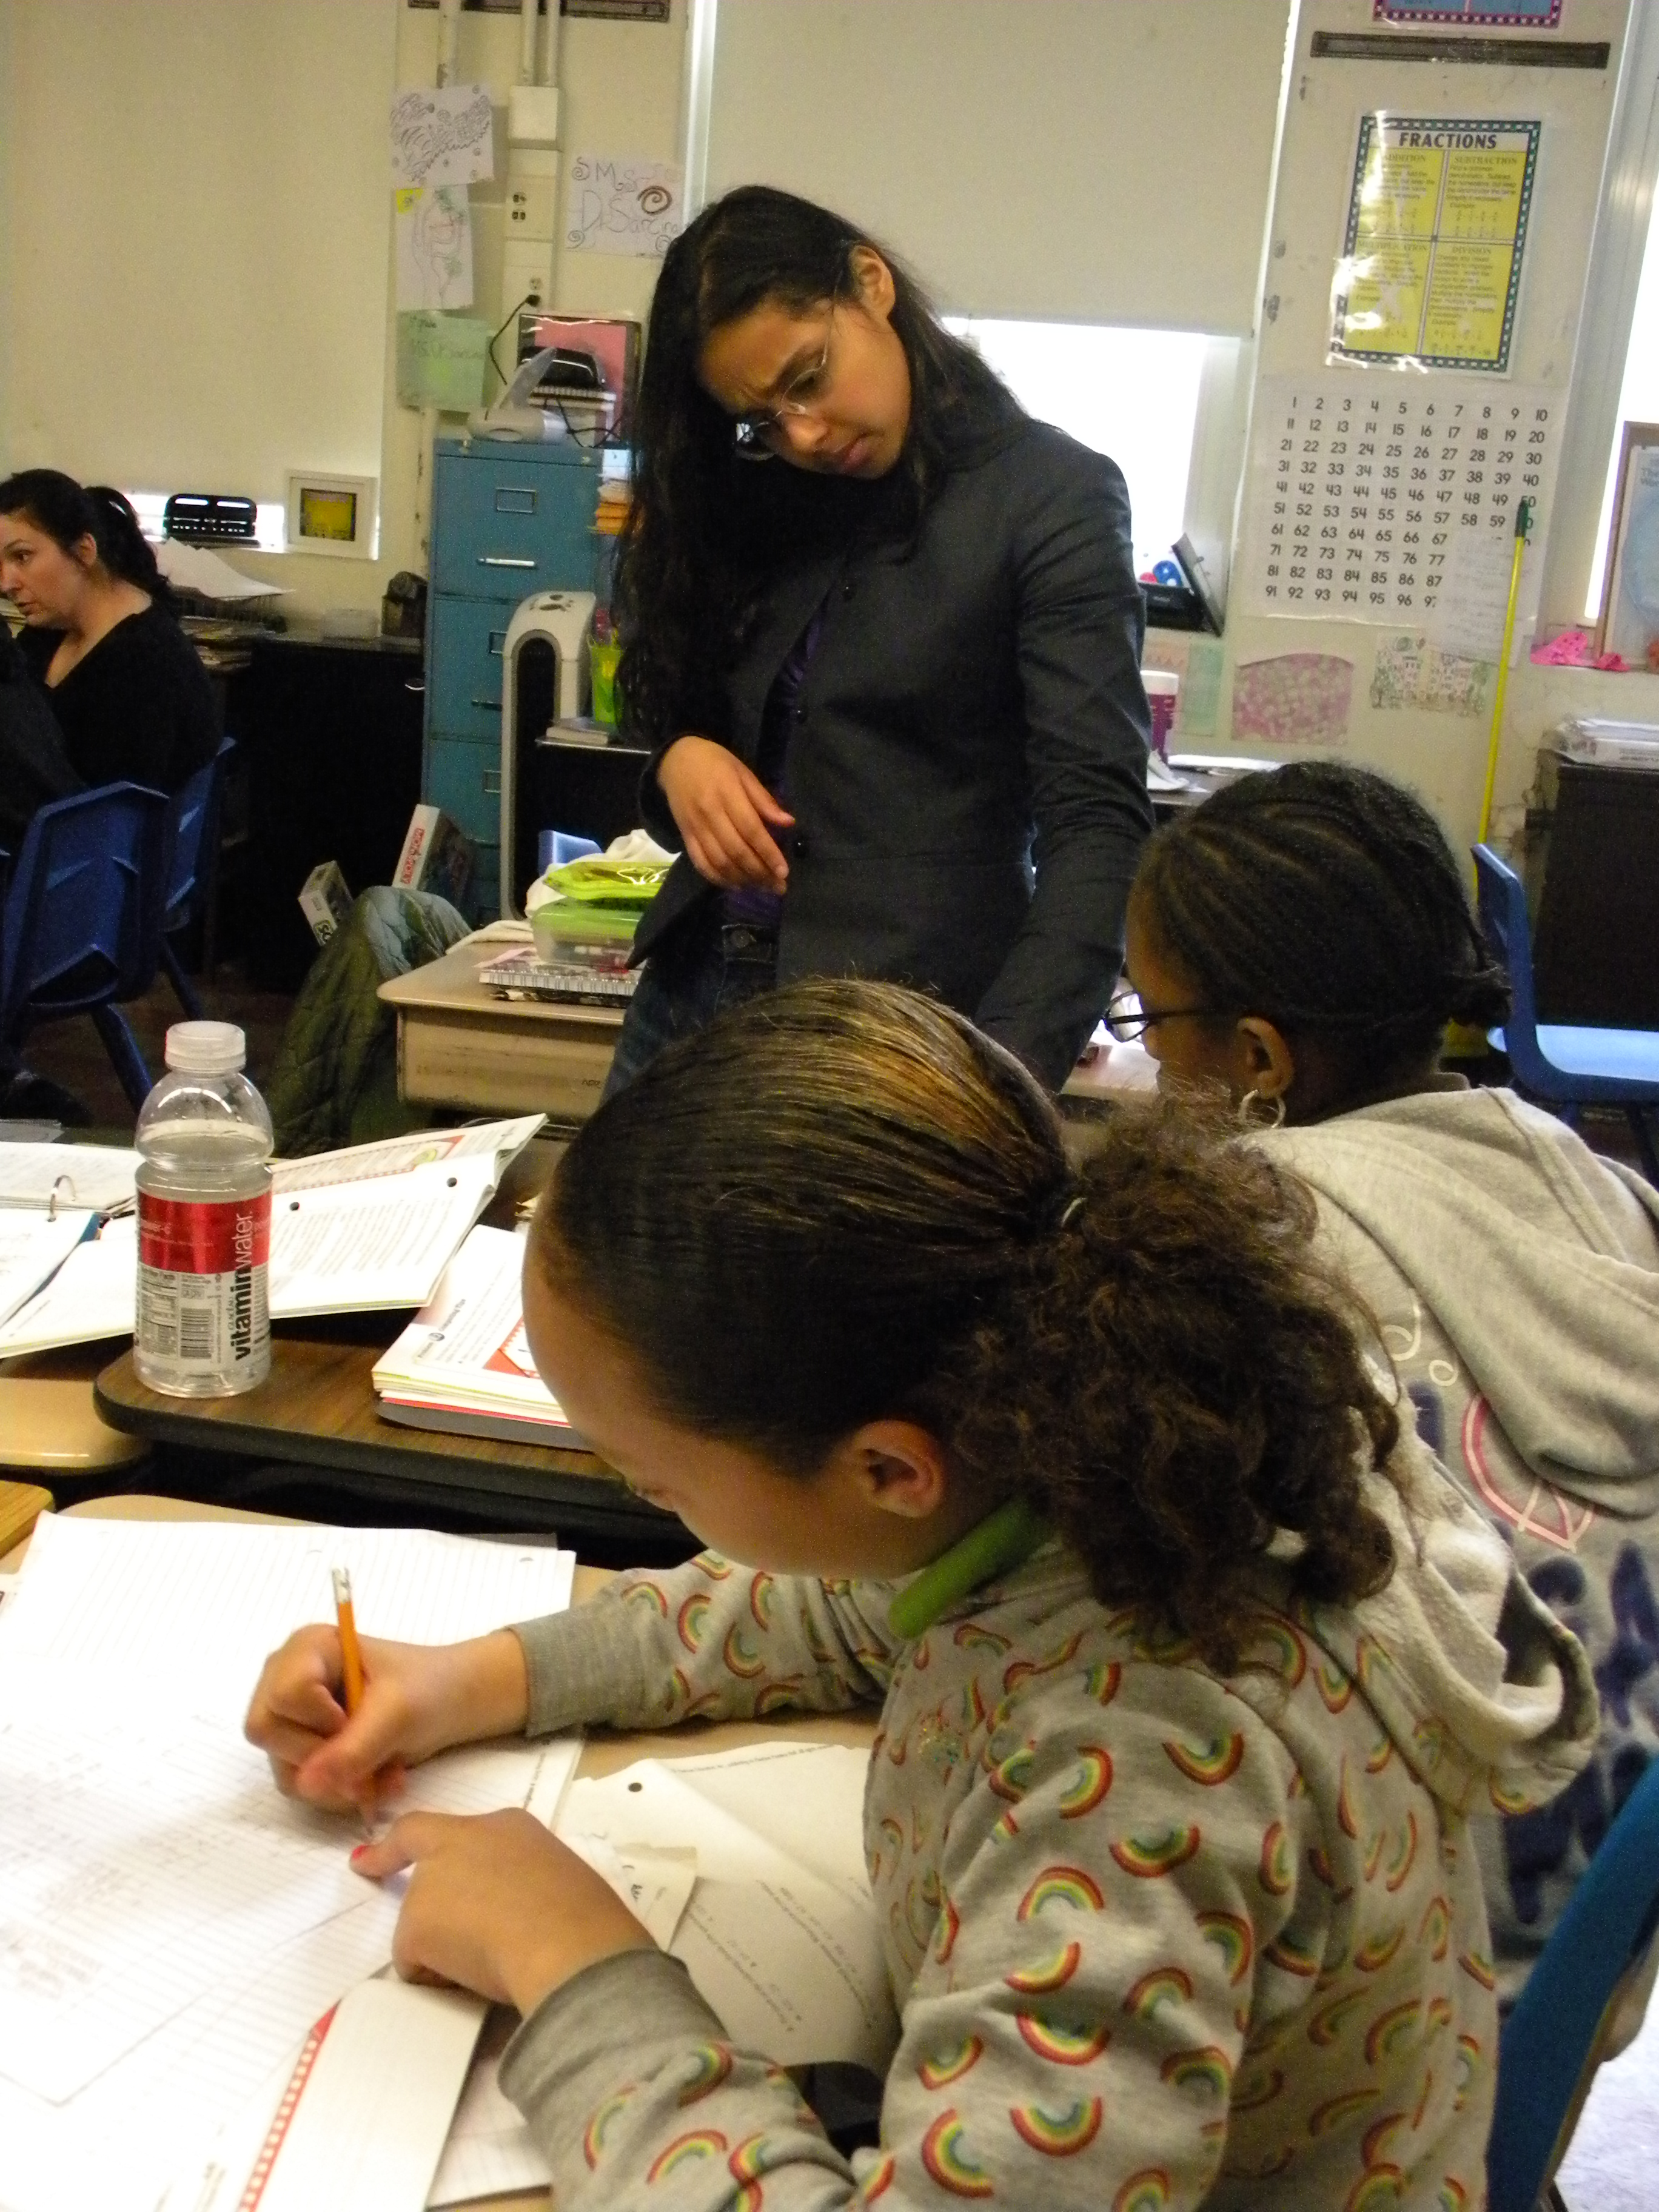 Jolene (foreground) assists a student with a math problem, allowing Ms. DiSarcina (background) to focus her attention on another student. 